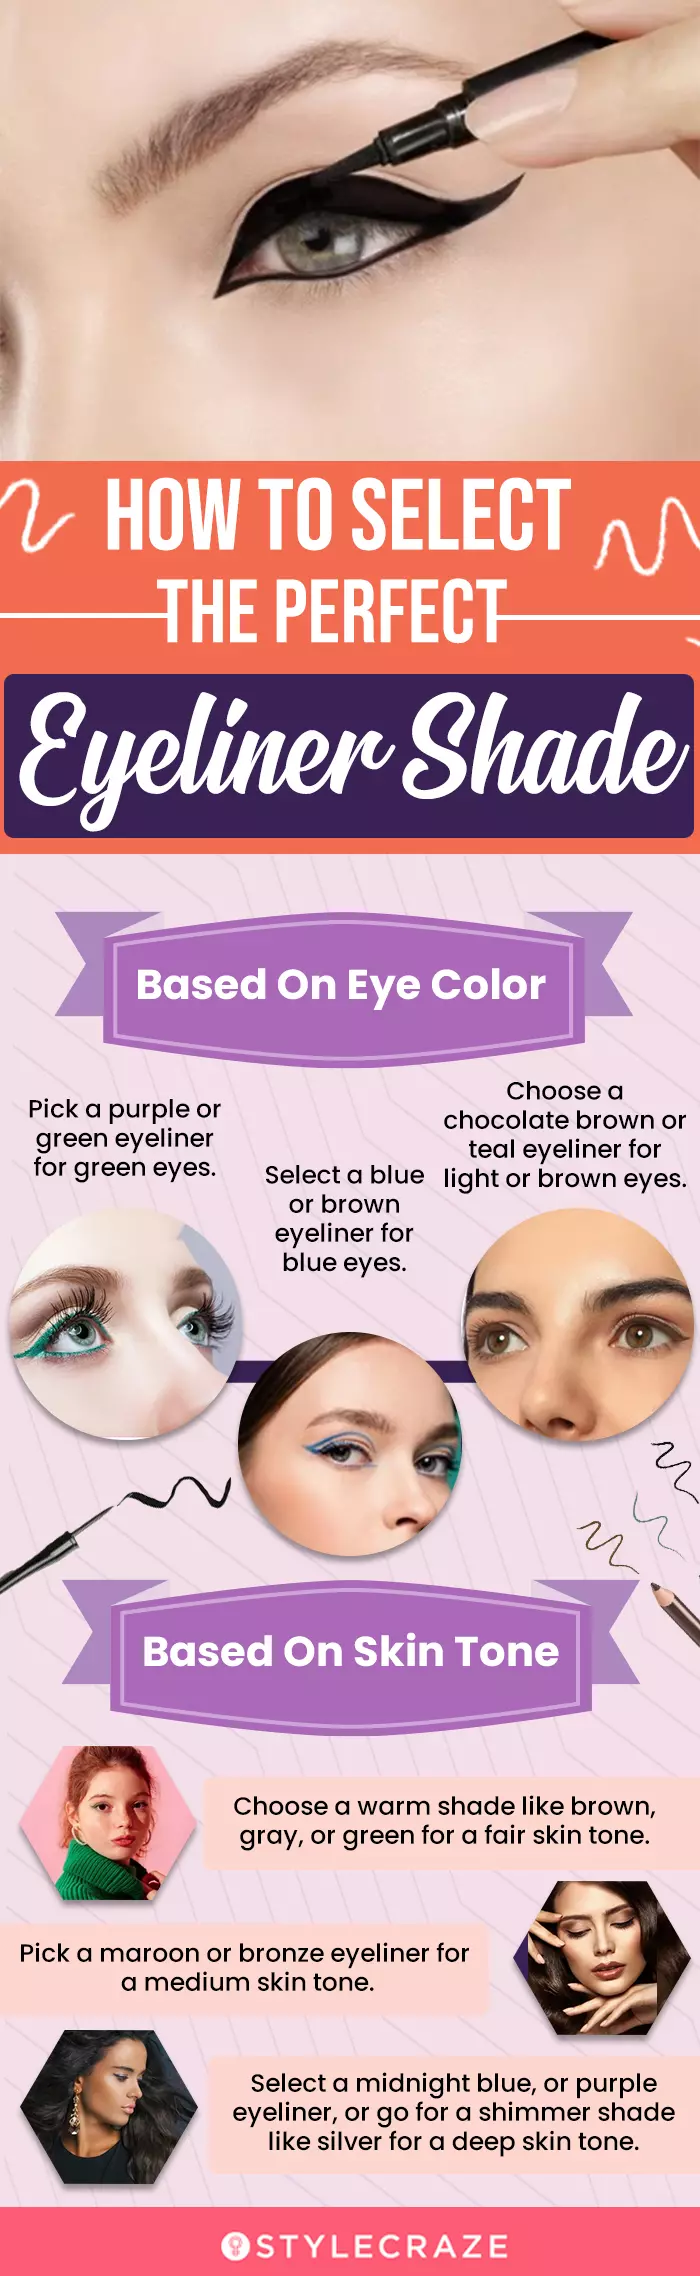 How To Select The Perfect Eyeliner Shade (infographic)